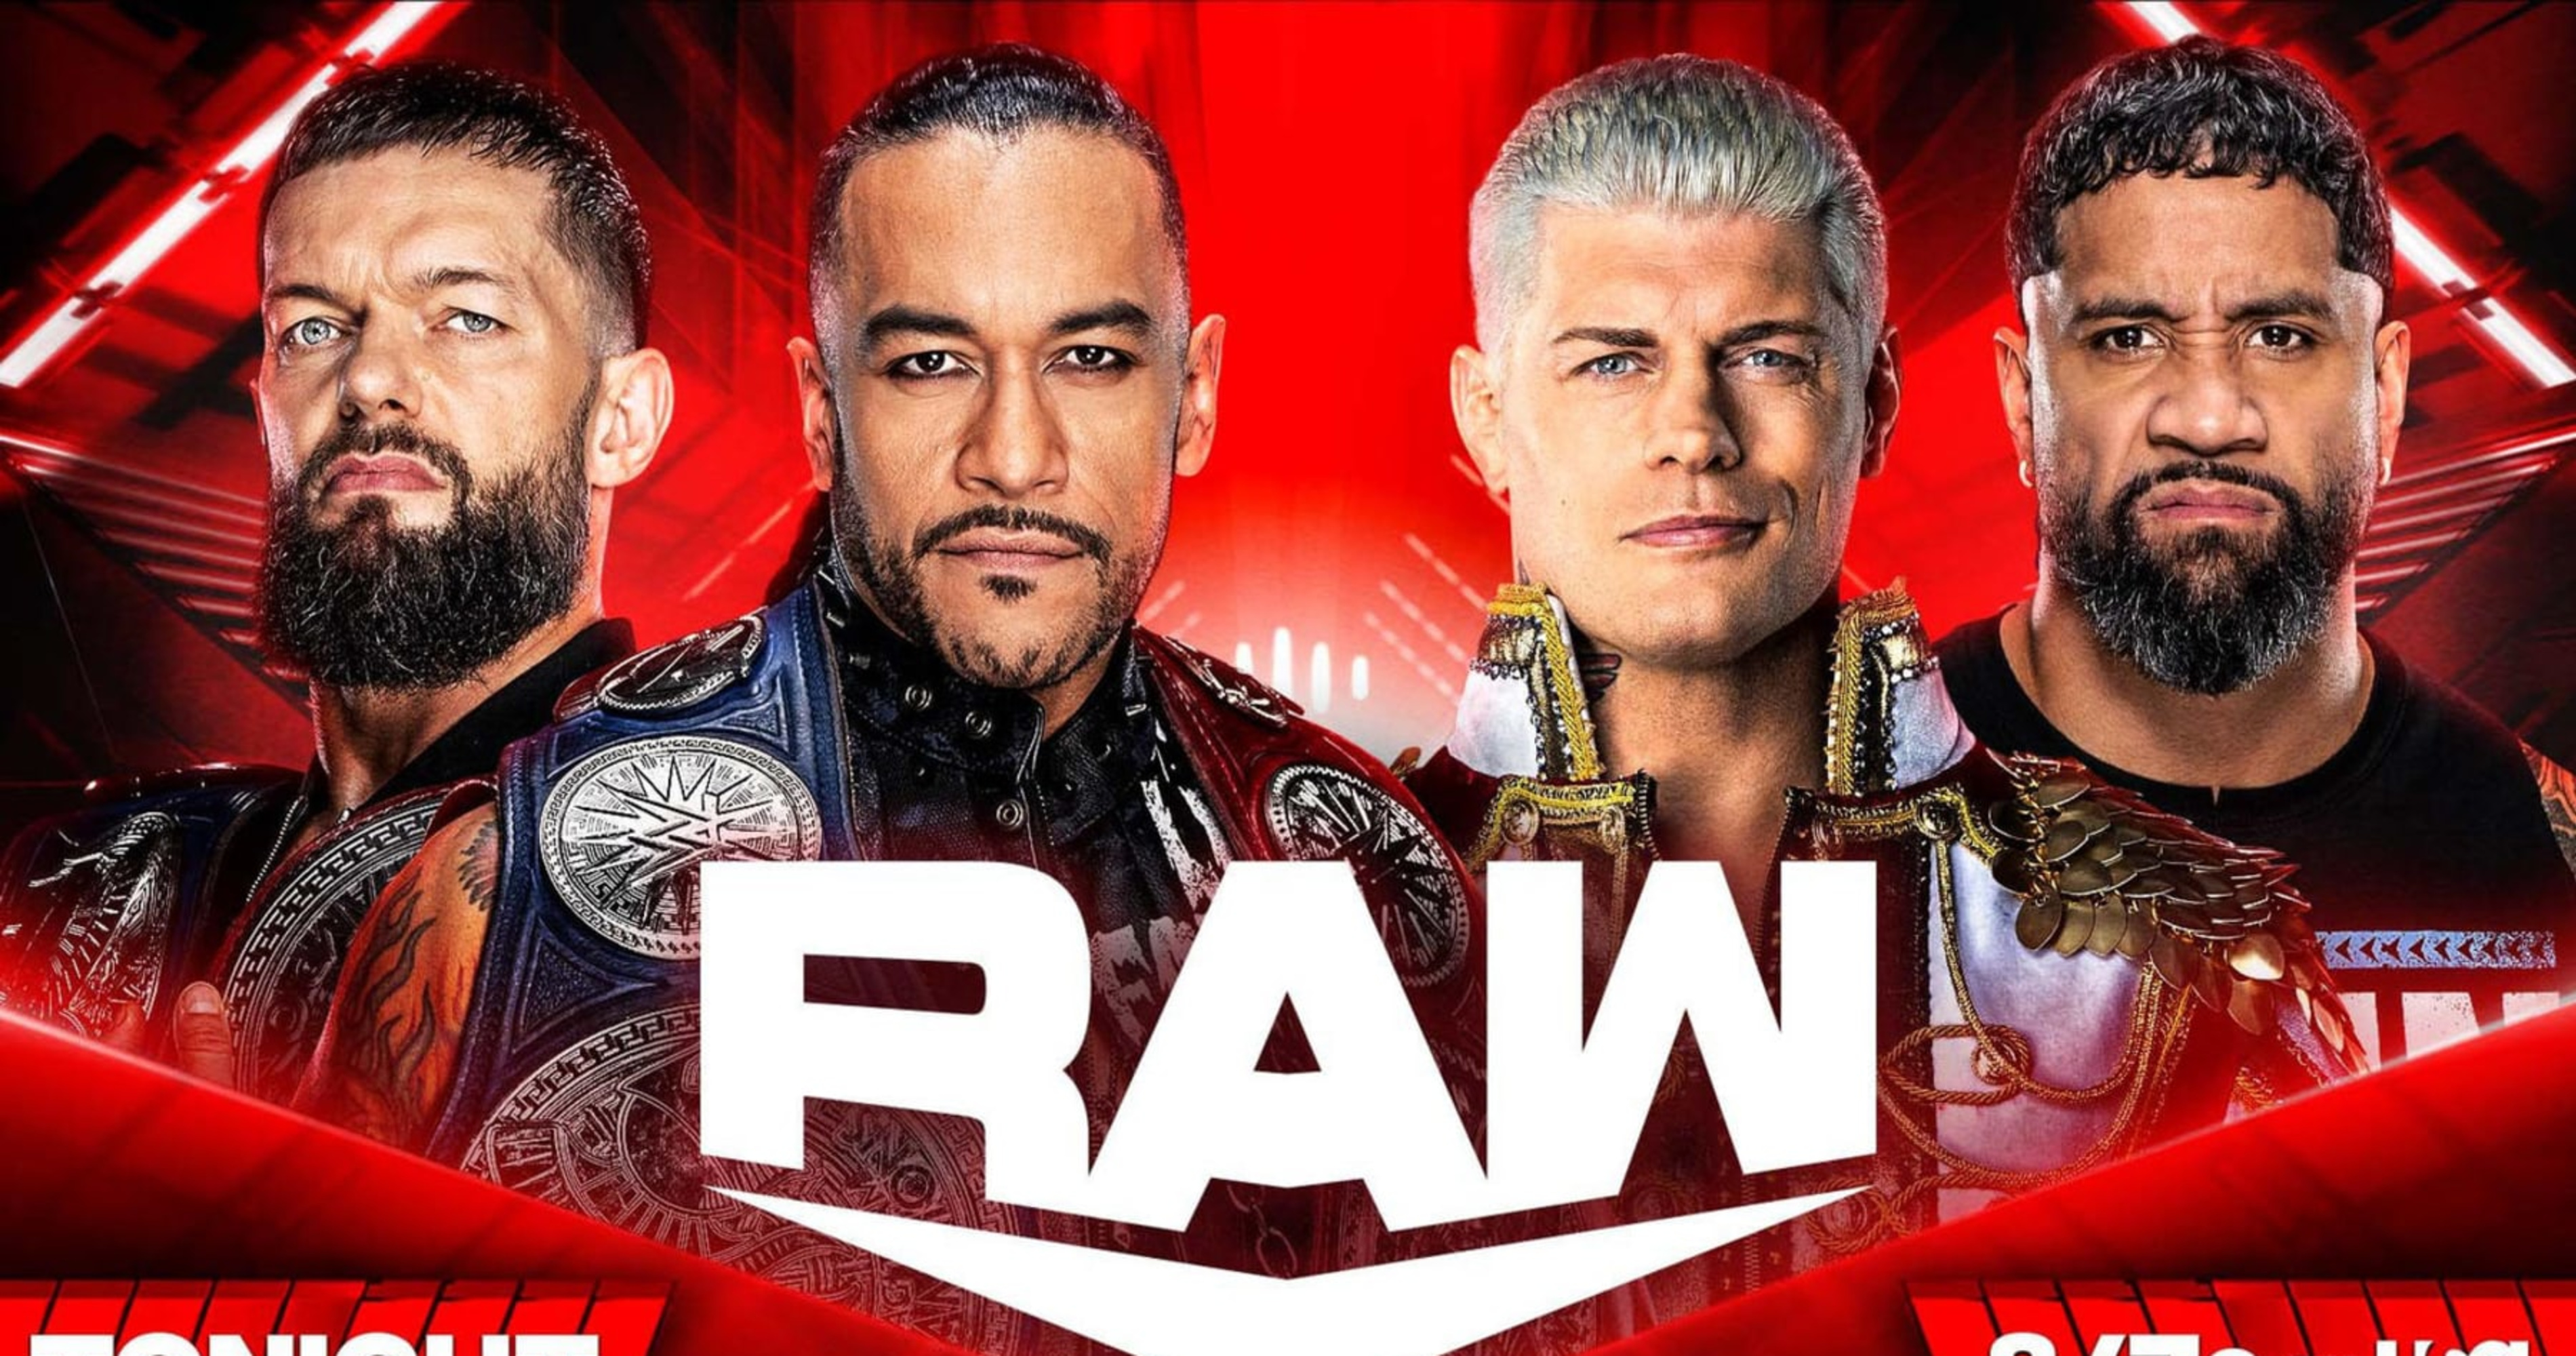 Updated Survivor Series 2023 match-card after WWE RAW: WarGames  participants, Rhea Ripley's challenger & more (November 6th)